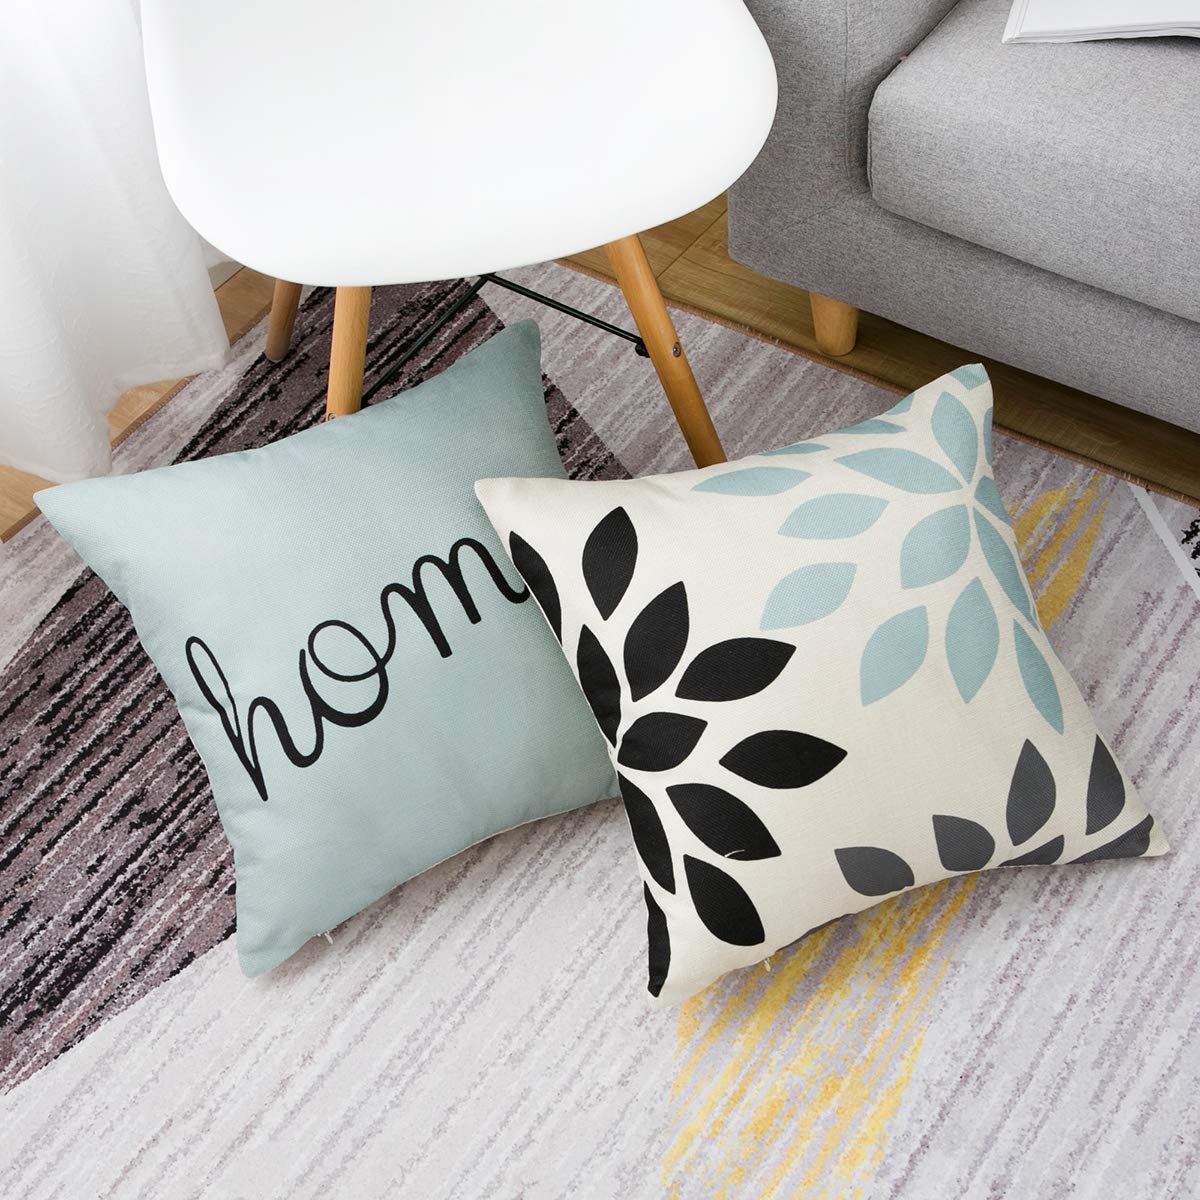 Yumin Throw Pillow Cases Decorative Soft Square Geometric Style Throw Pillow Cover Cushion Case for Sofa 18 x 18 Inch Set of 4